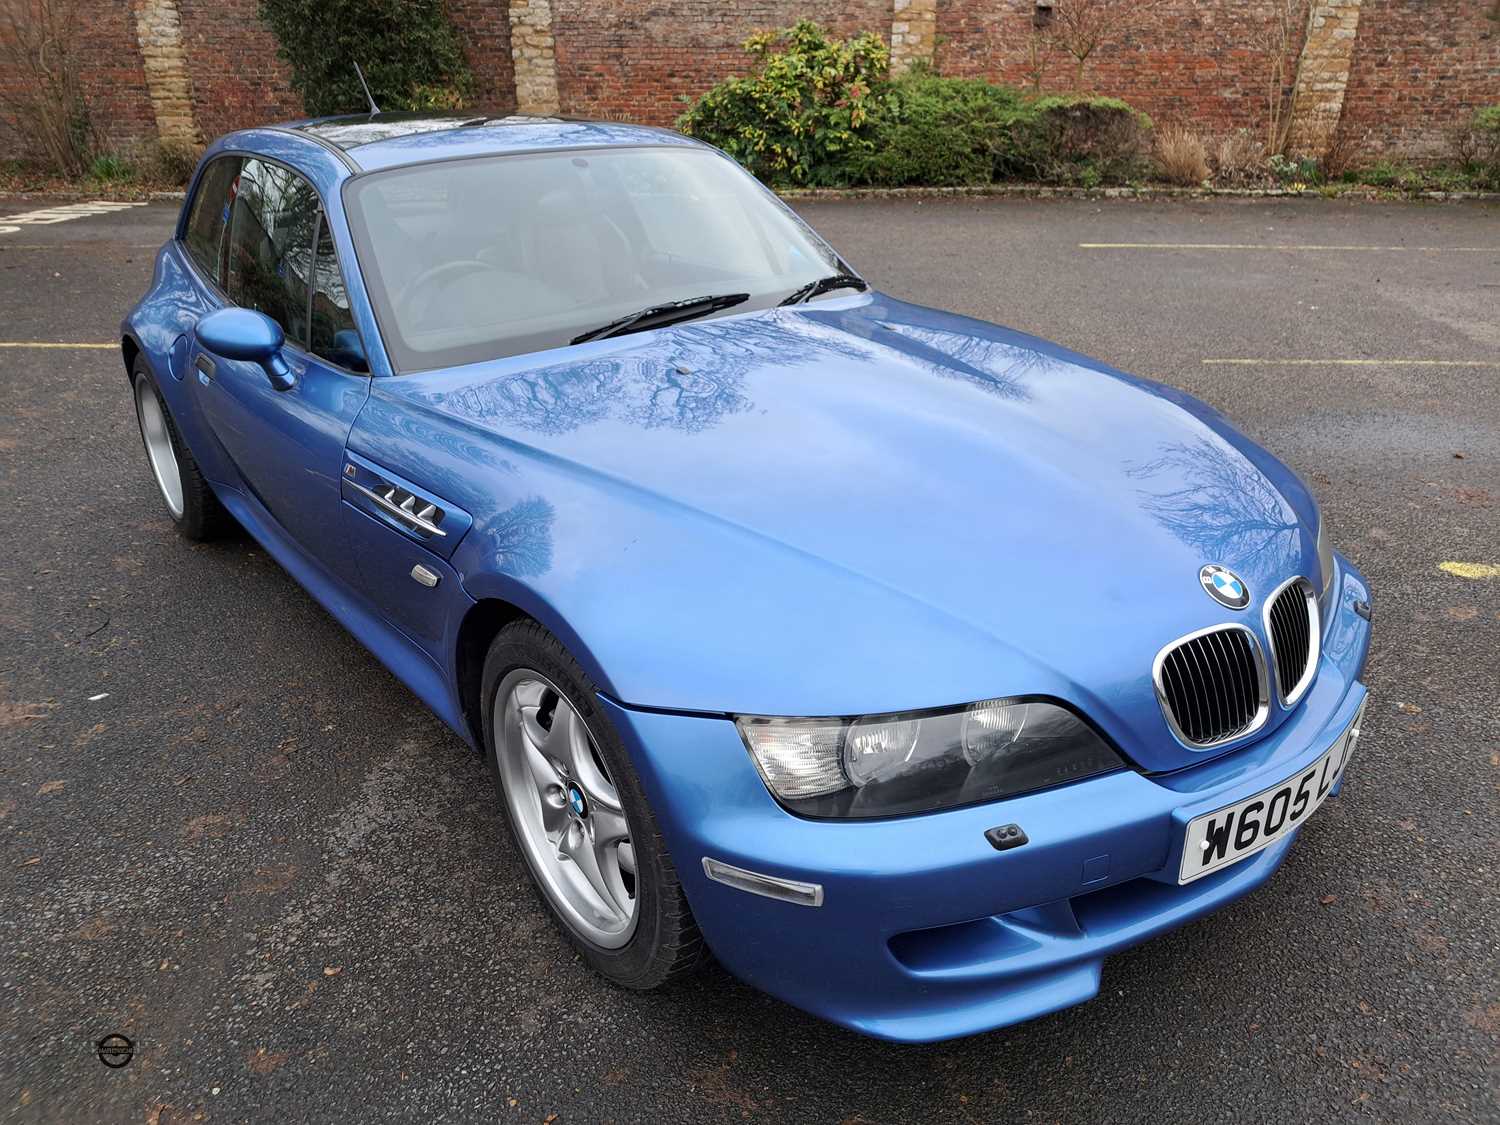 Lot 397 - 2000 BMW M COUPE